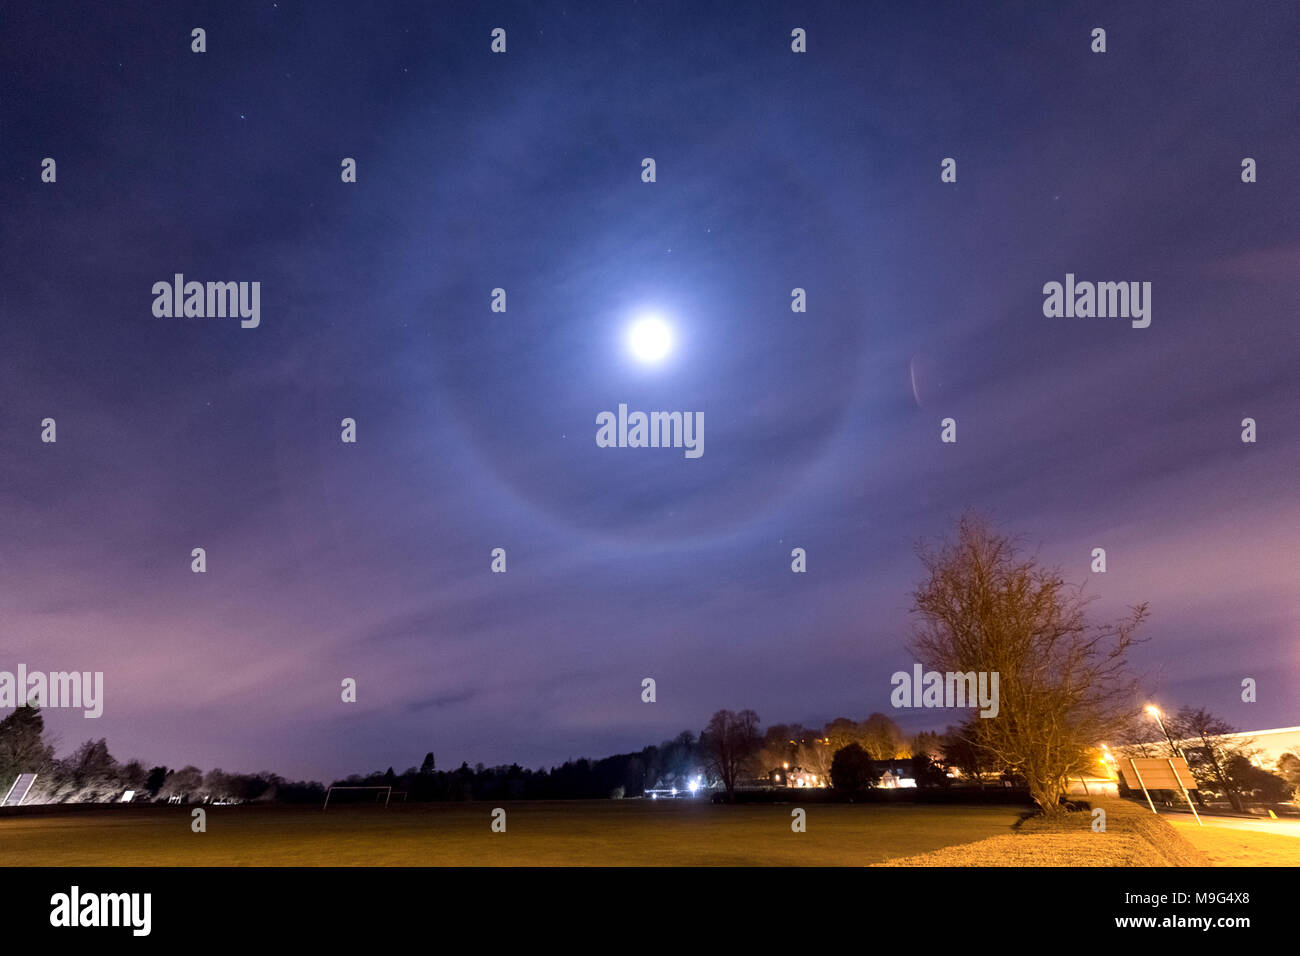 Rocester, Staffordshire, UK. 25 March 2018. UK Weather: the Moon is seen with a 22º halo formed by ice crystals, which refract the light off the moon, creating a ring around it. Seen and taken from Rocester, Staffordshire, on the night of the 25 March 2018. Credit: Richard Holmes/Alamy Live News Stock Photo